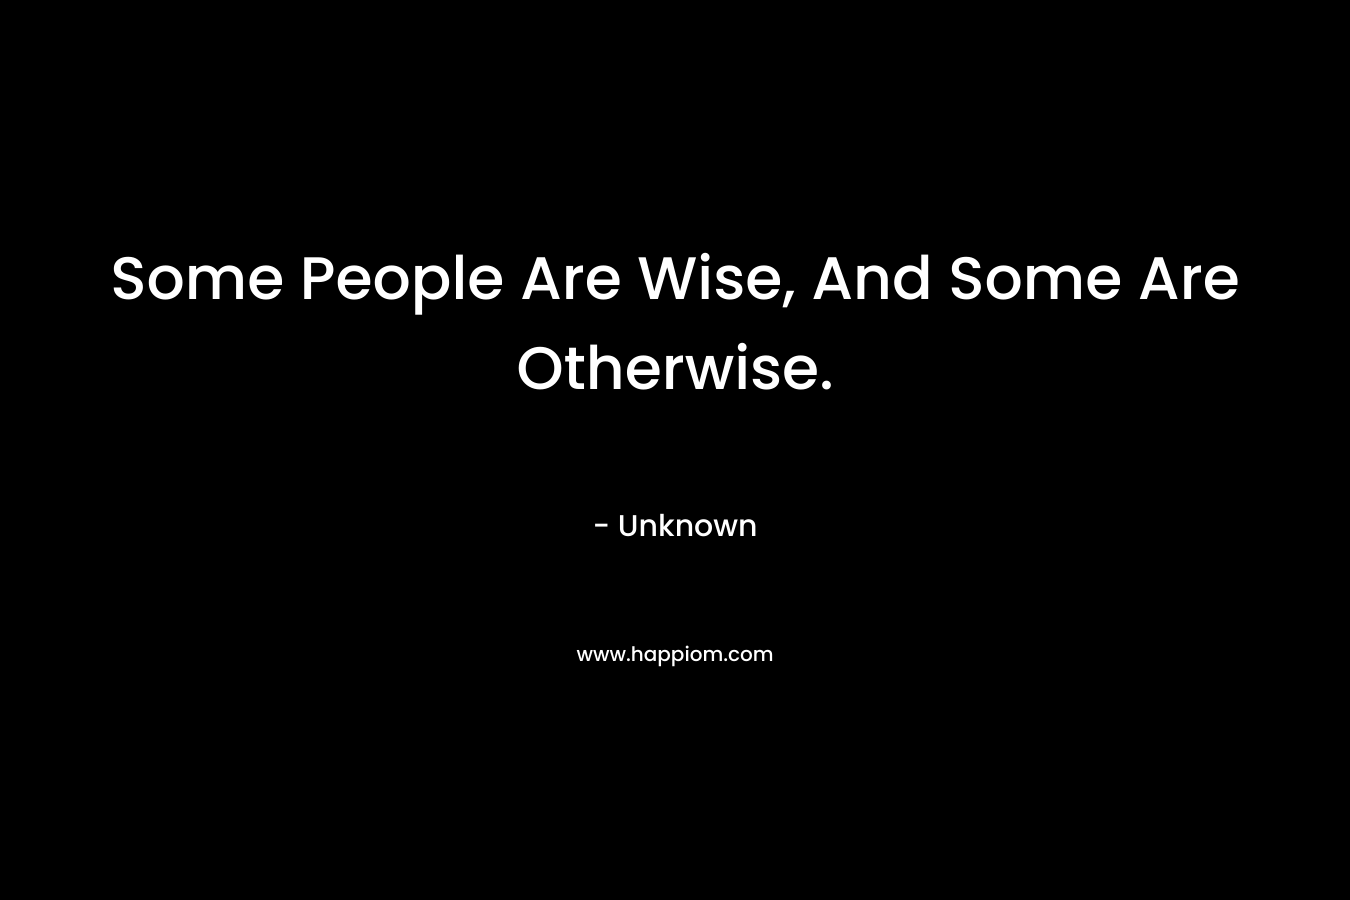 Some People Are Wise, And Some Are Otherwise. – Unknown